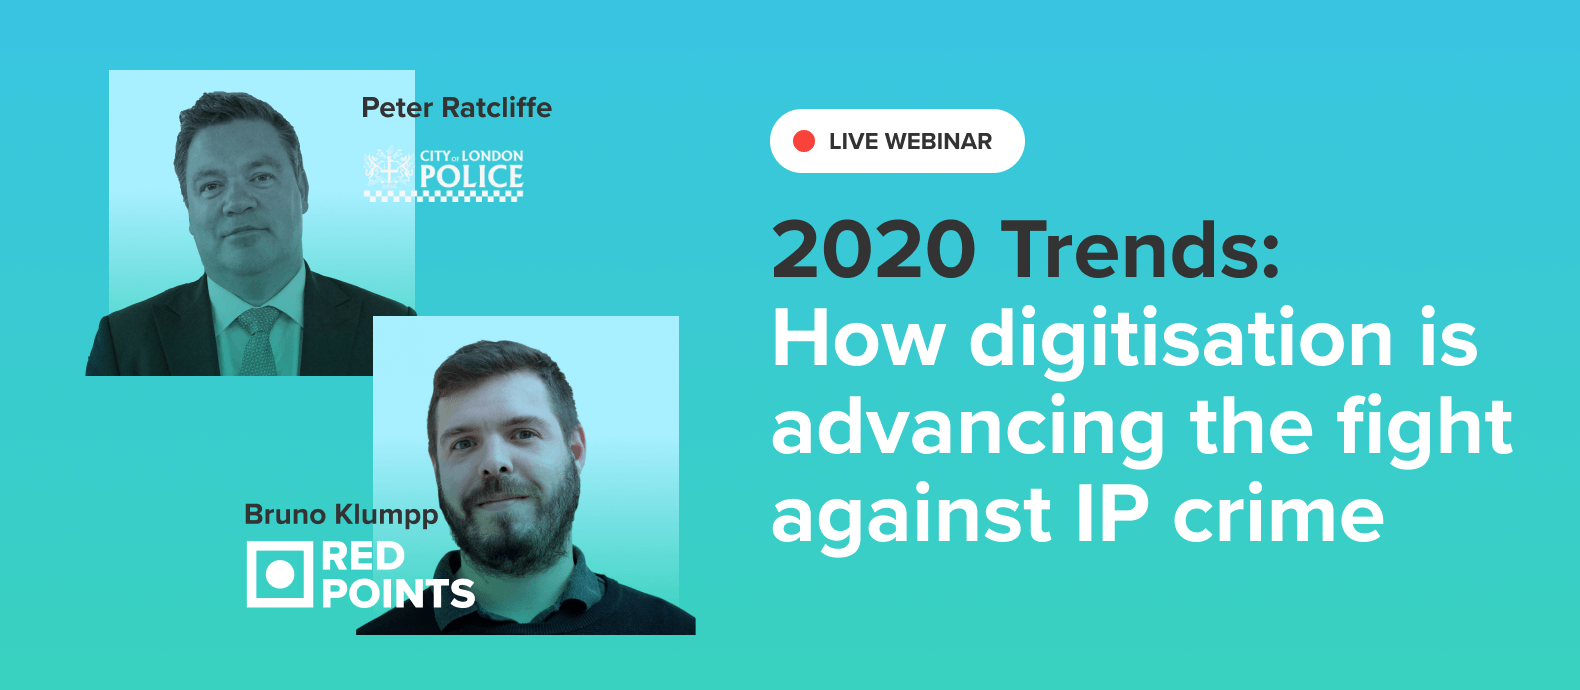 2020 trends: How digitization is advancing the fight against IP crime (part 2)